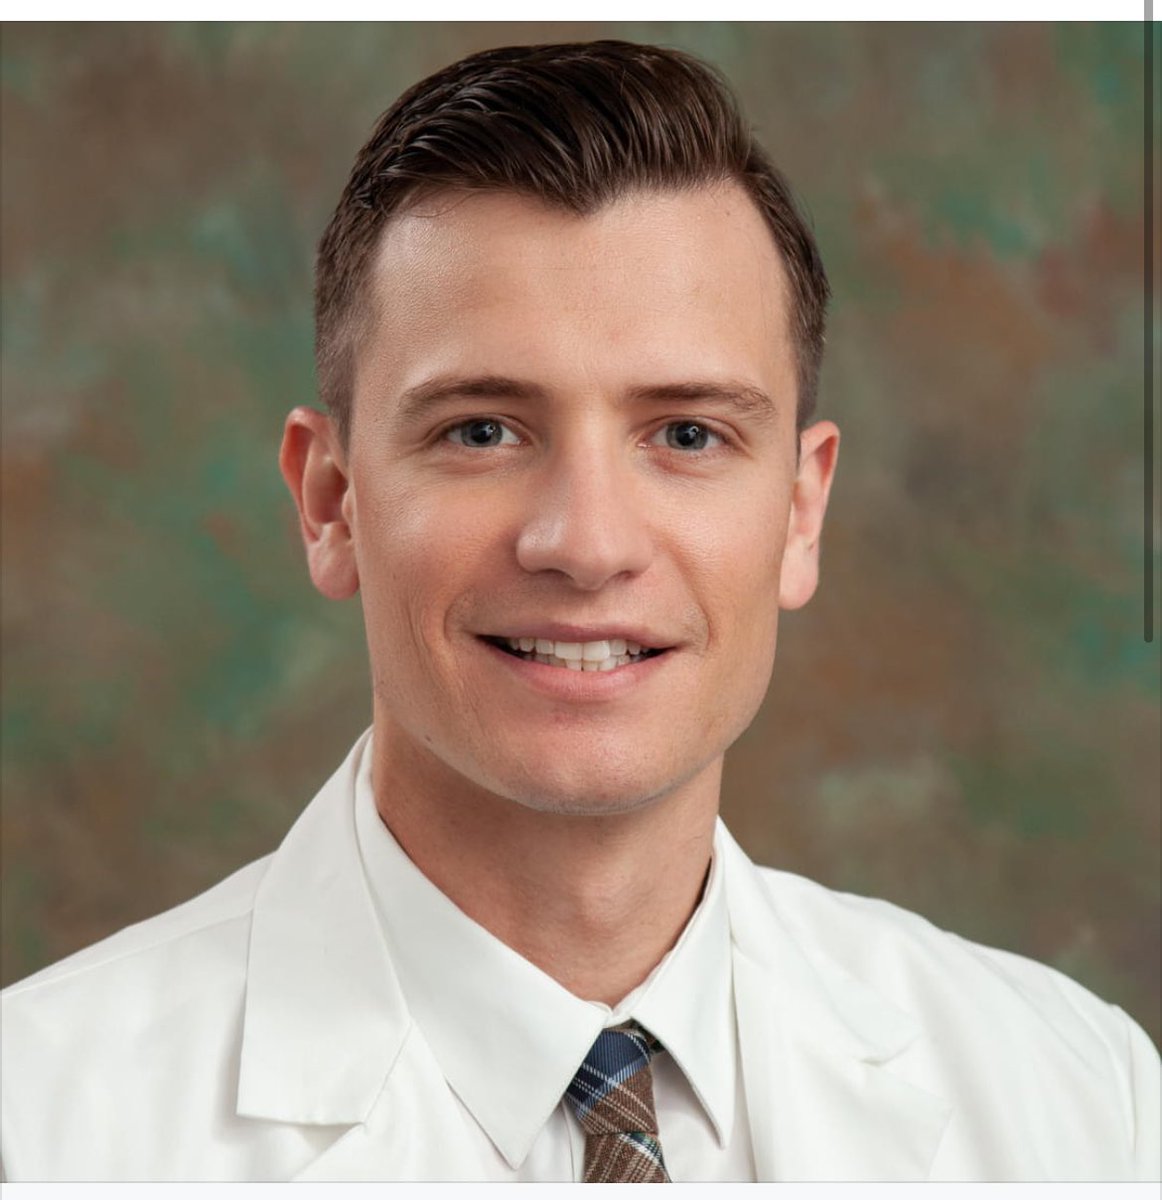 Murillo Adrados, M.D. is welcoming patients at our Westlake location for hip and knee orthopaedic care. Dr. Adrados provides expert care for your aging joints. He specializes in minimally invasive hip and knee replacements as well as complex and revision hip and knee construction